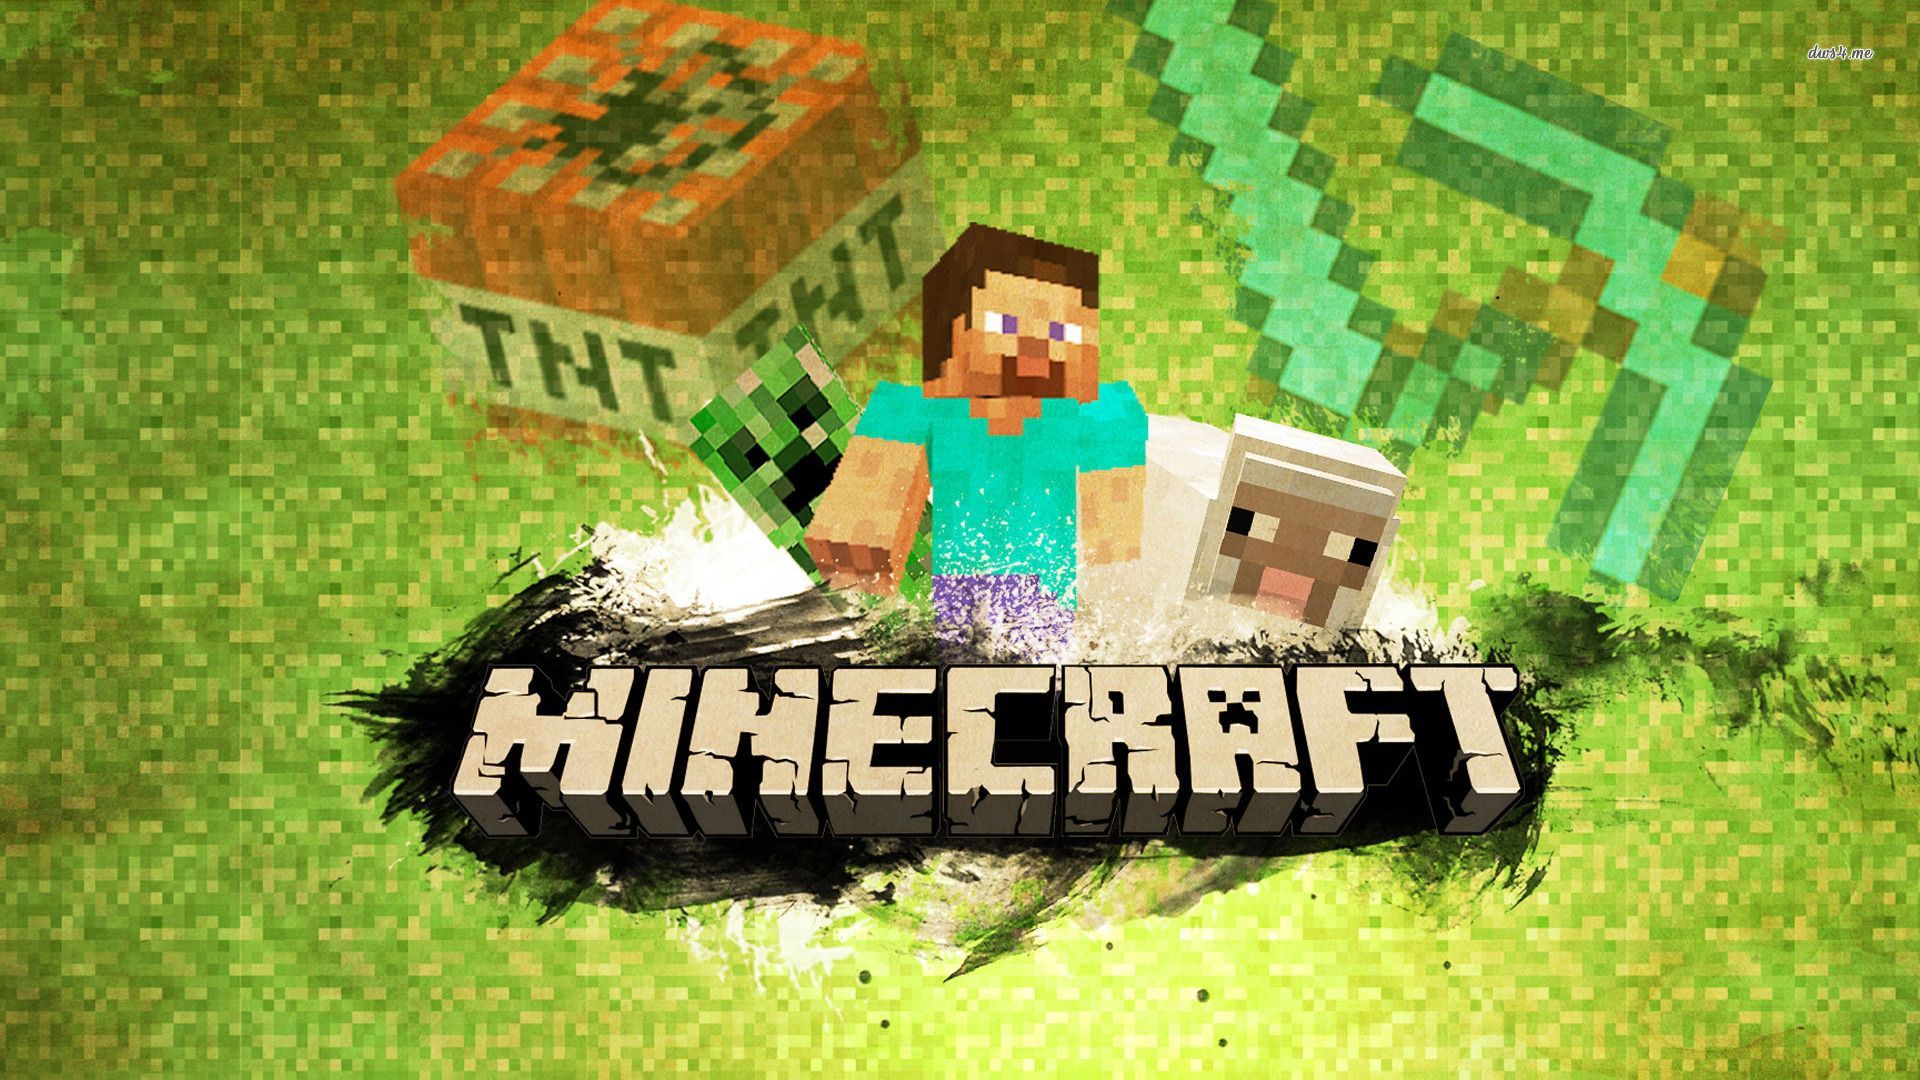 Minecraft wallpaper - Game wallpapers - #10941